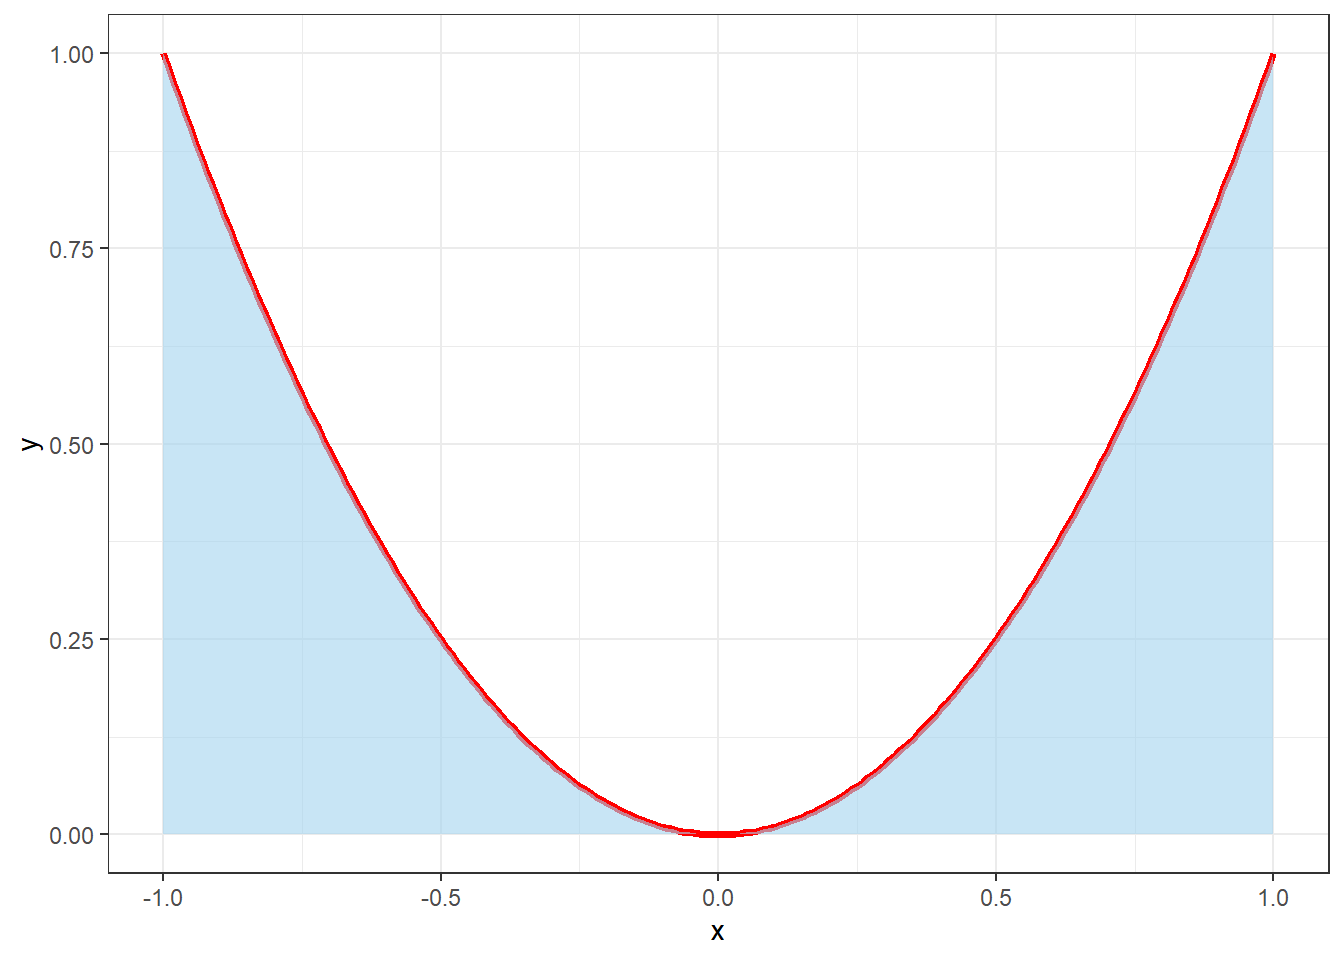 Plot of the squared function and the area under its curve